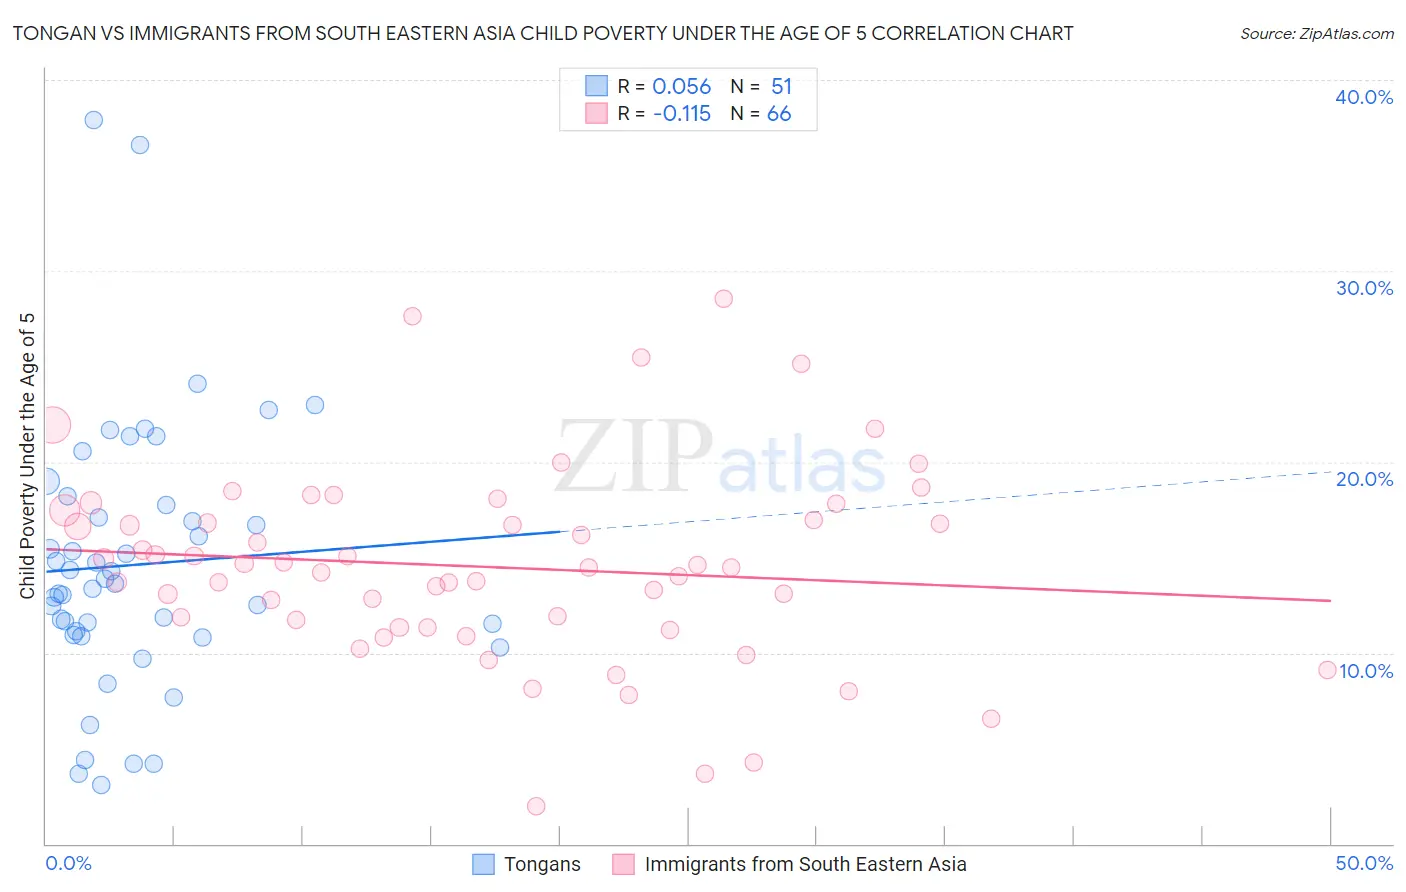 Tongan vs Immigrants from South Eastern Asia Child Poverty Under the Age of 5